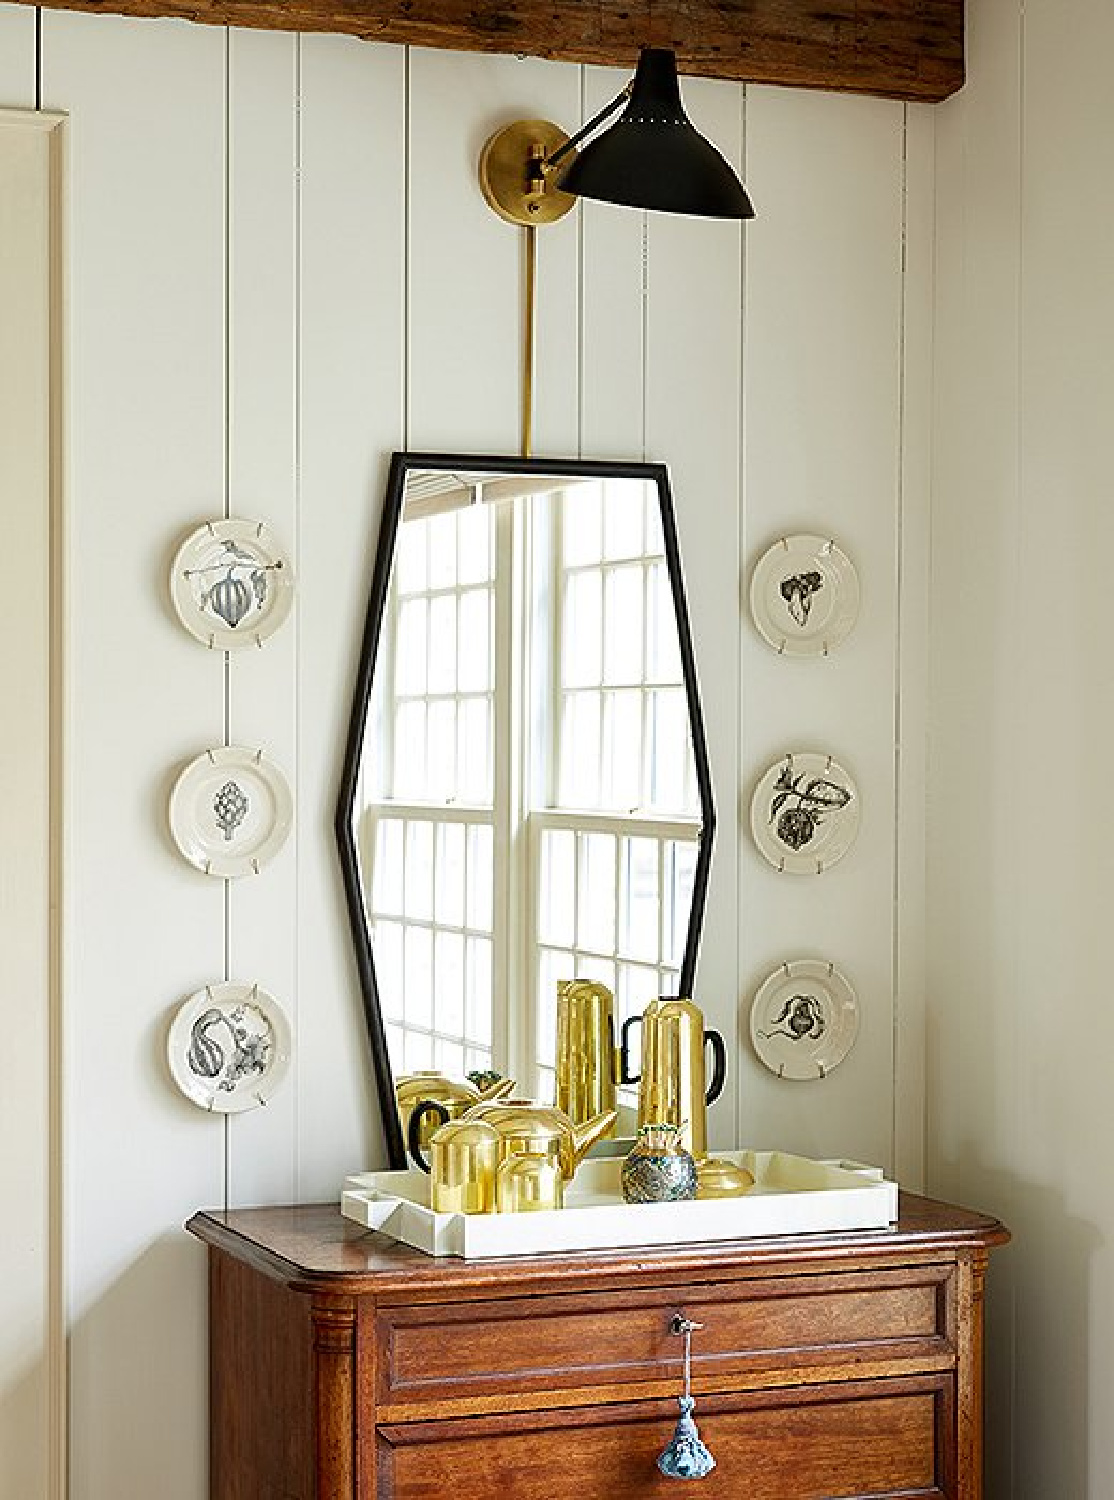 Decorative plates flanking a mirror and sconce in a lovely dining room in an elegant Connecticut farmhouse - OKL.